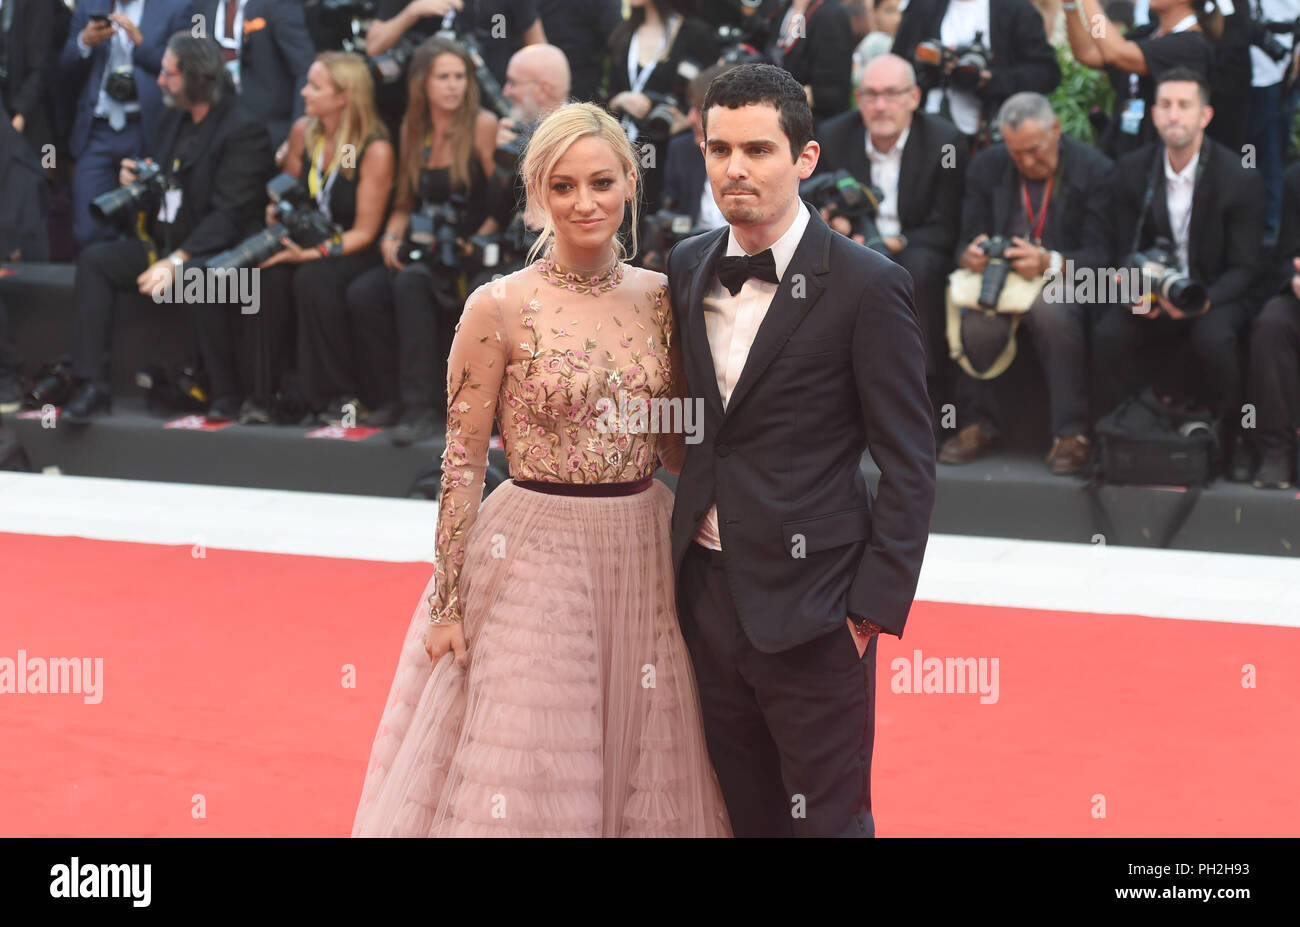 29.08.2018, Italy, Venice: The actress Olivia Hamilton and the screenwriter Damien Chazelle can be seen at the opening of the film festival on the red carpet at the Lido. The film festival runs from 29 August to 8 September and is taking place for the 75th time this year. Photo: Felix Hörhager/dpa Stock Photo